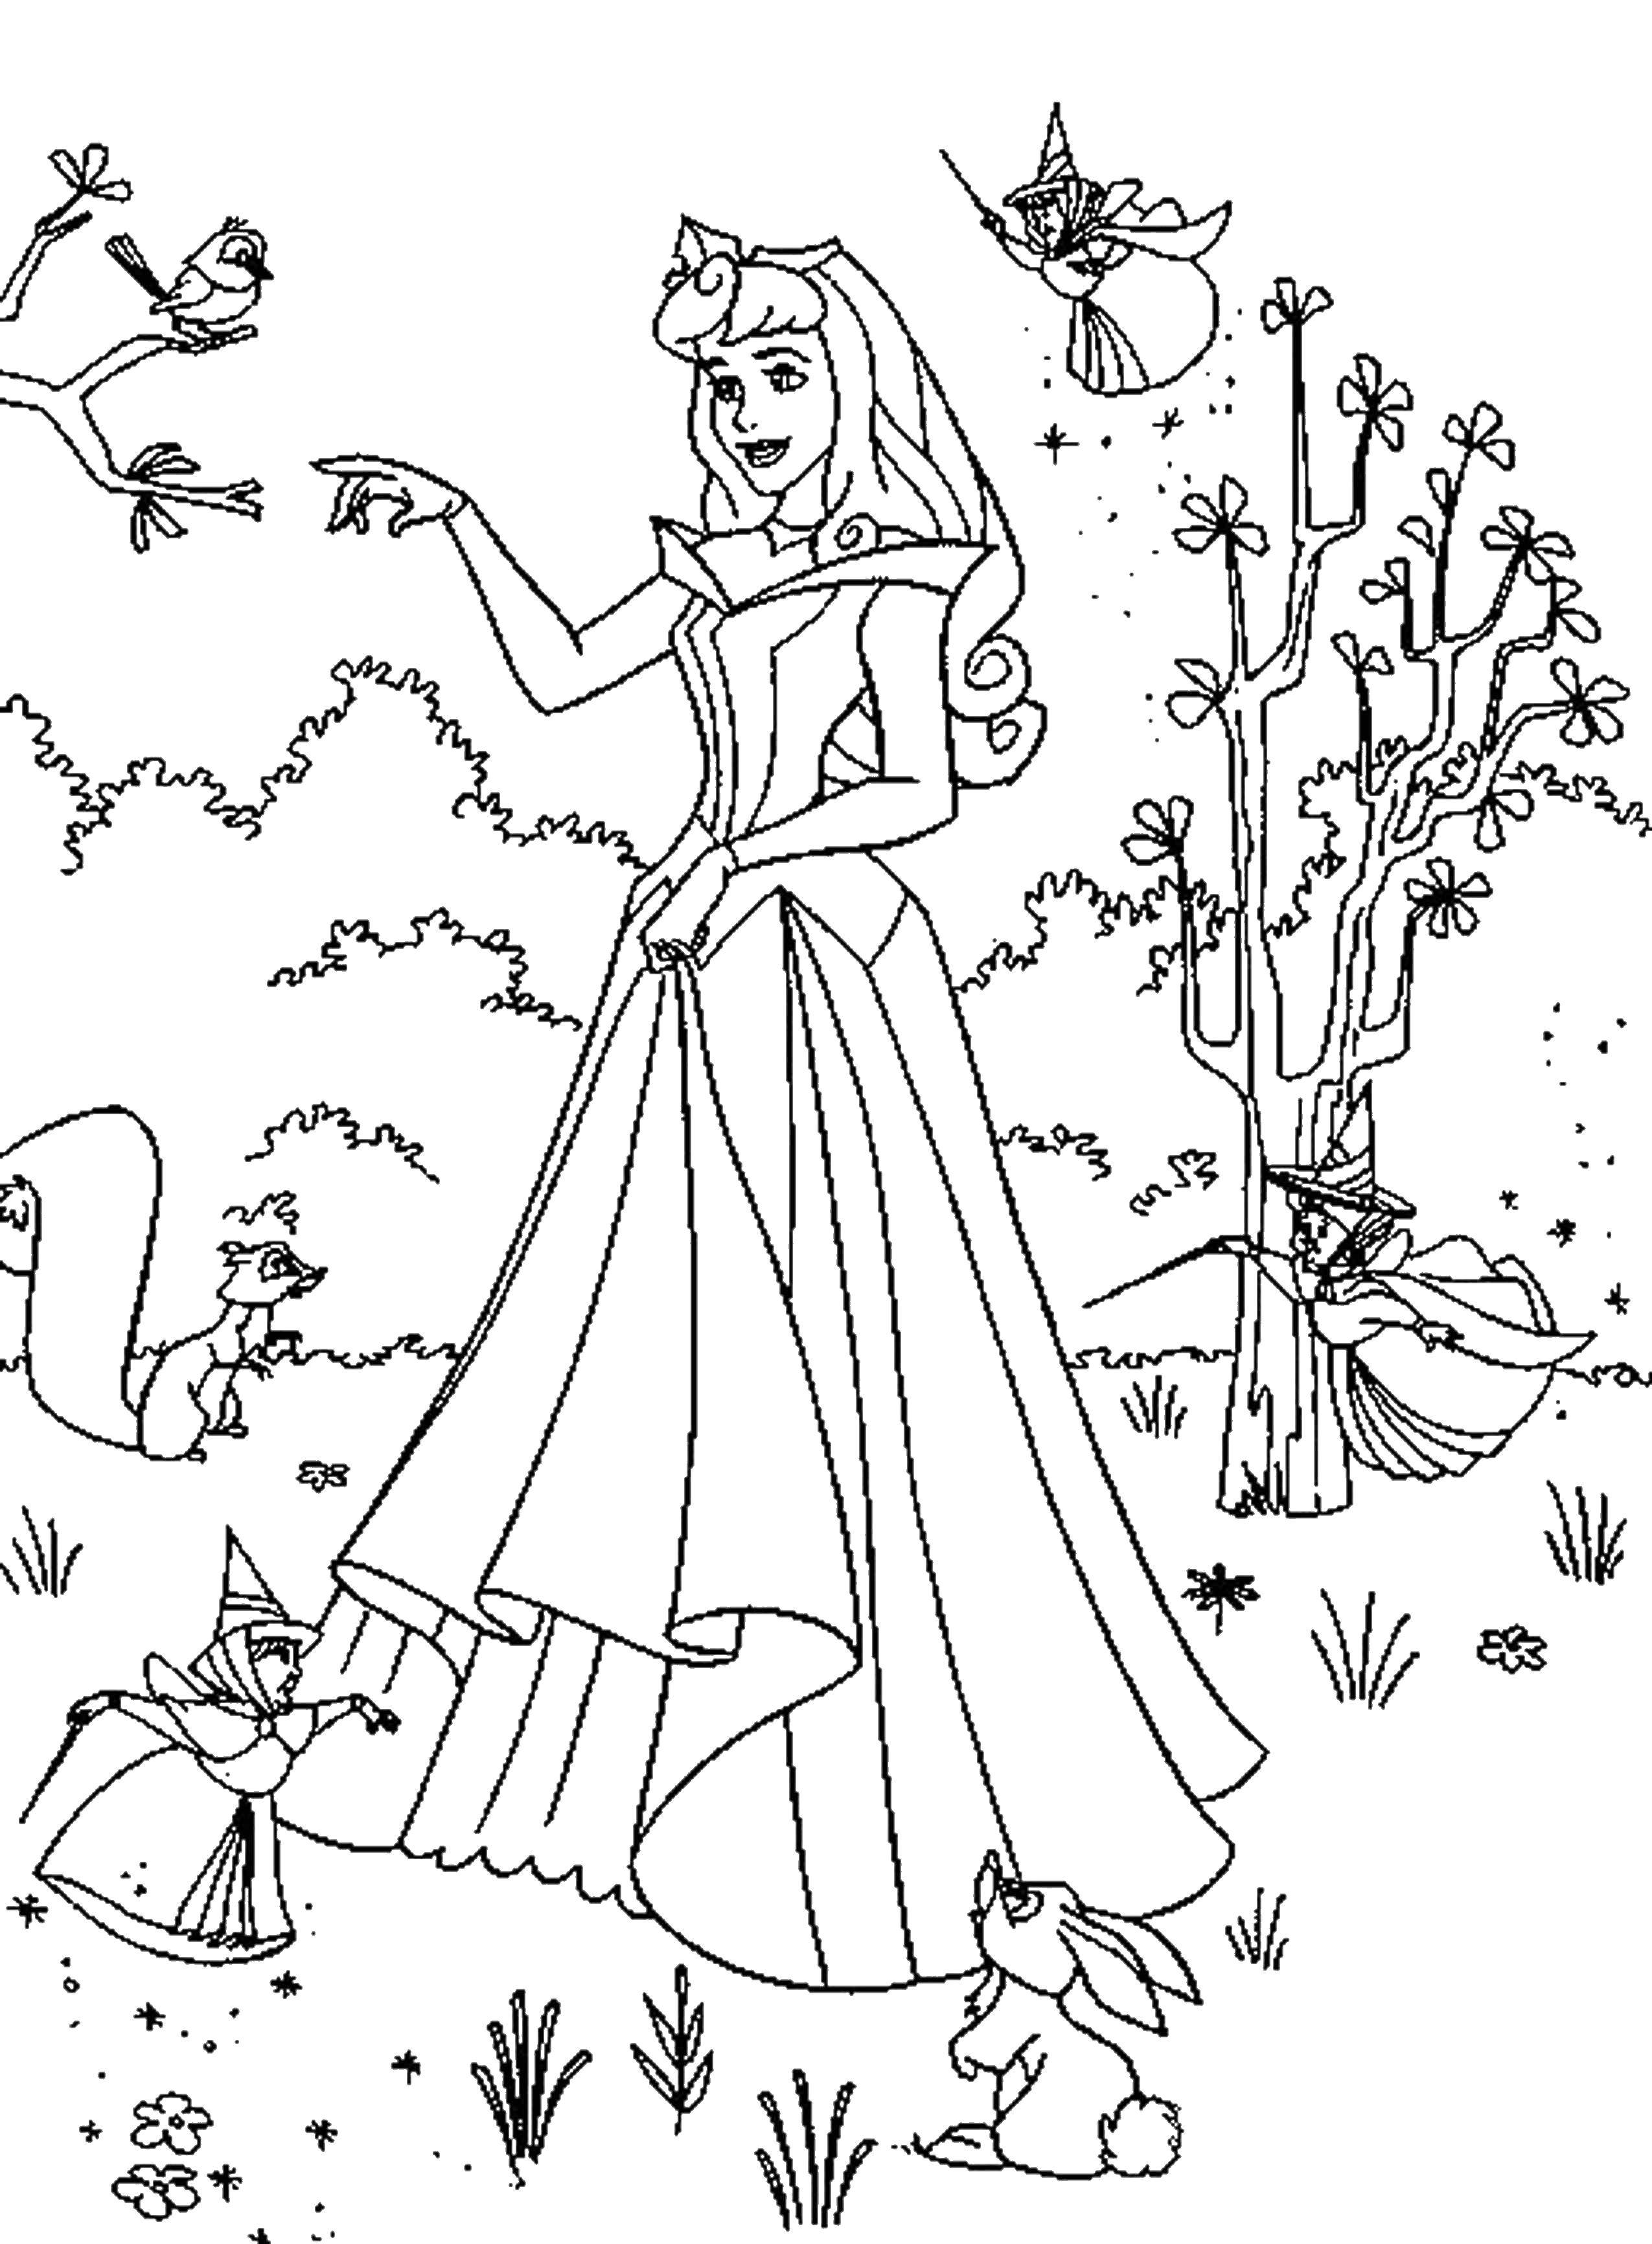 Coloring Princess Aurora with fairies. Category sleeping beauty. Tags:  sleeping beauty, Princess Aurora.